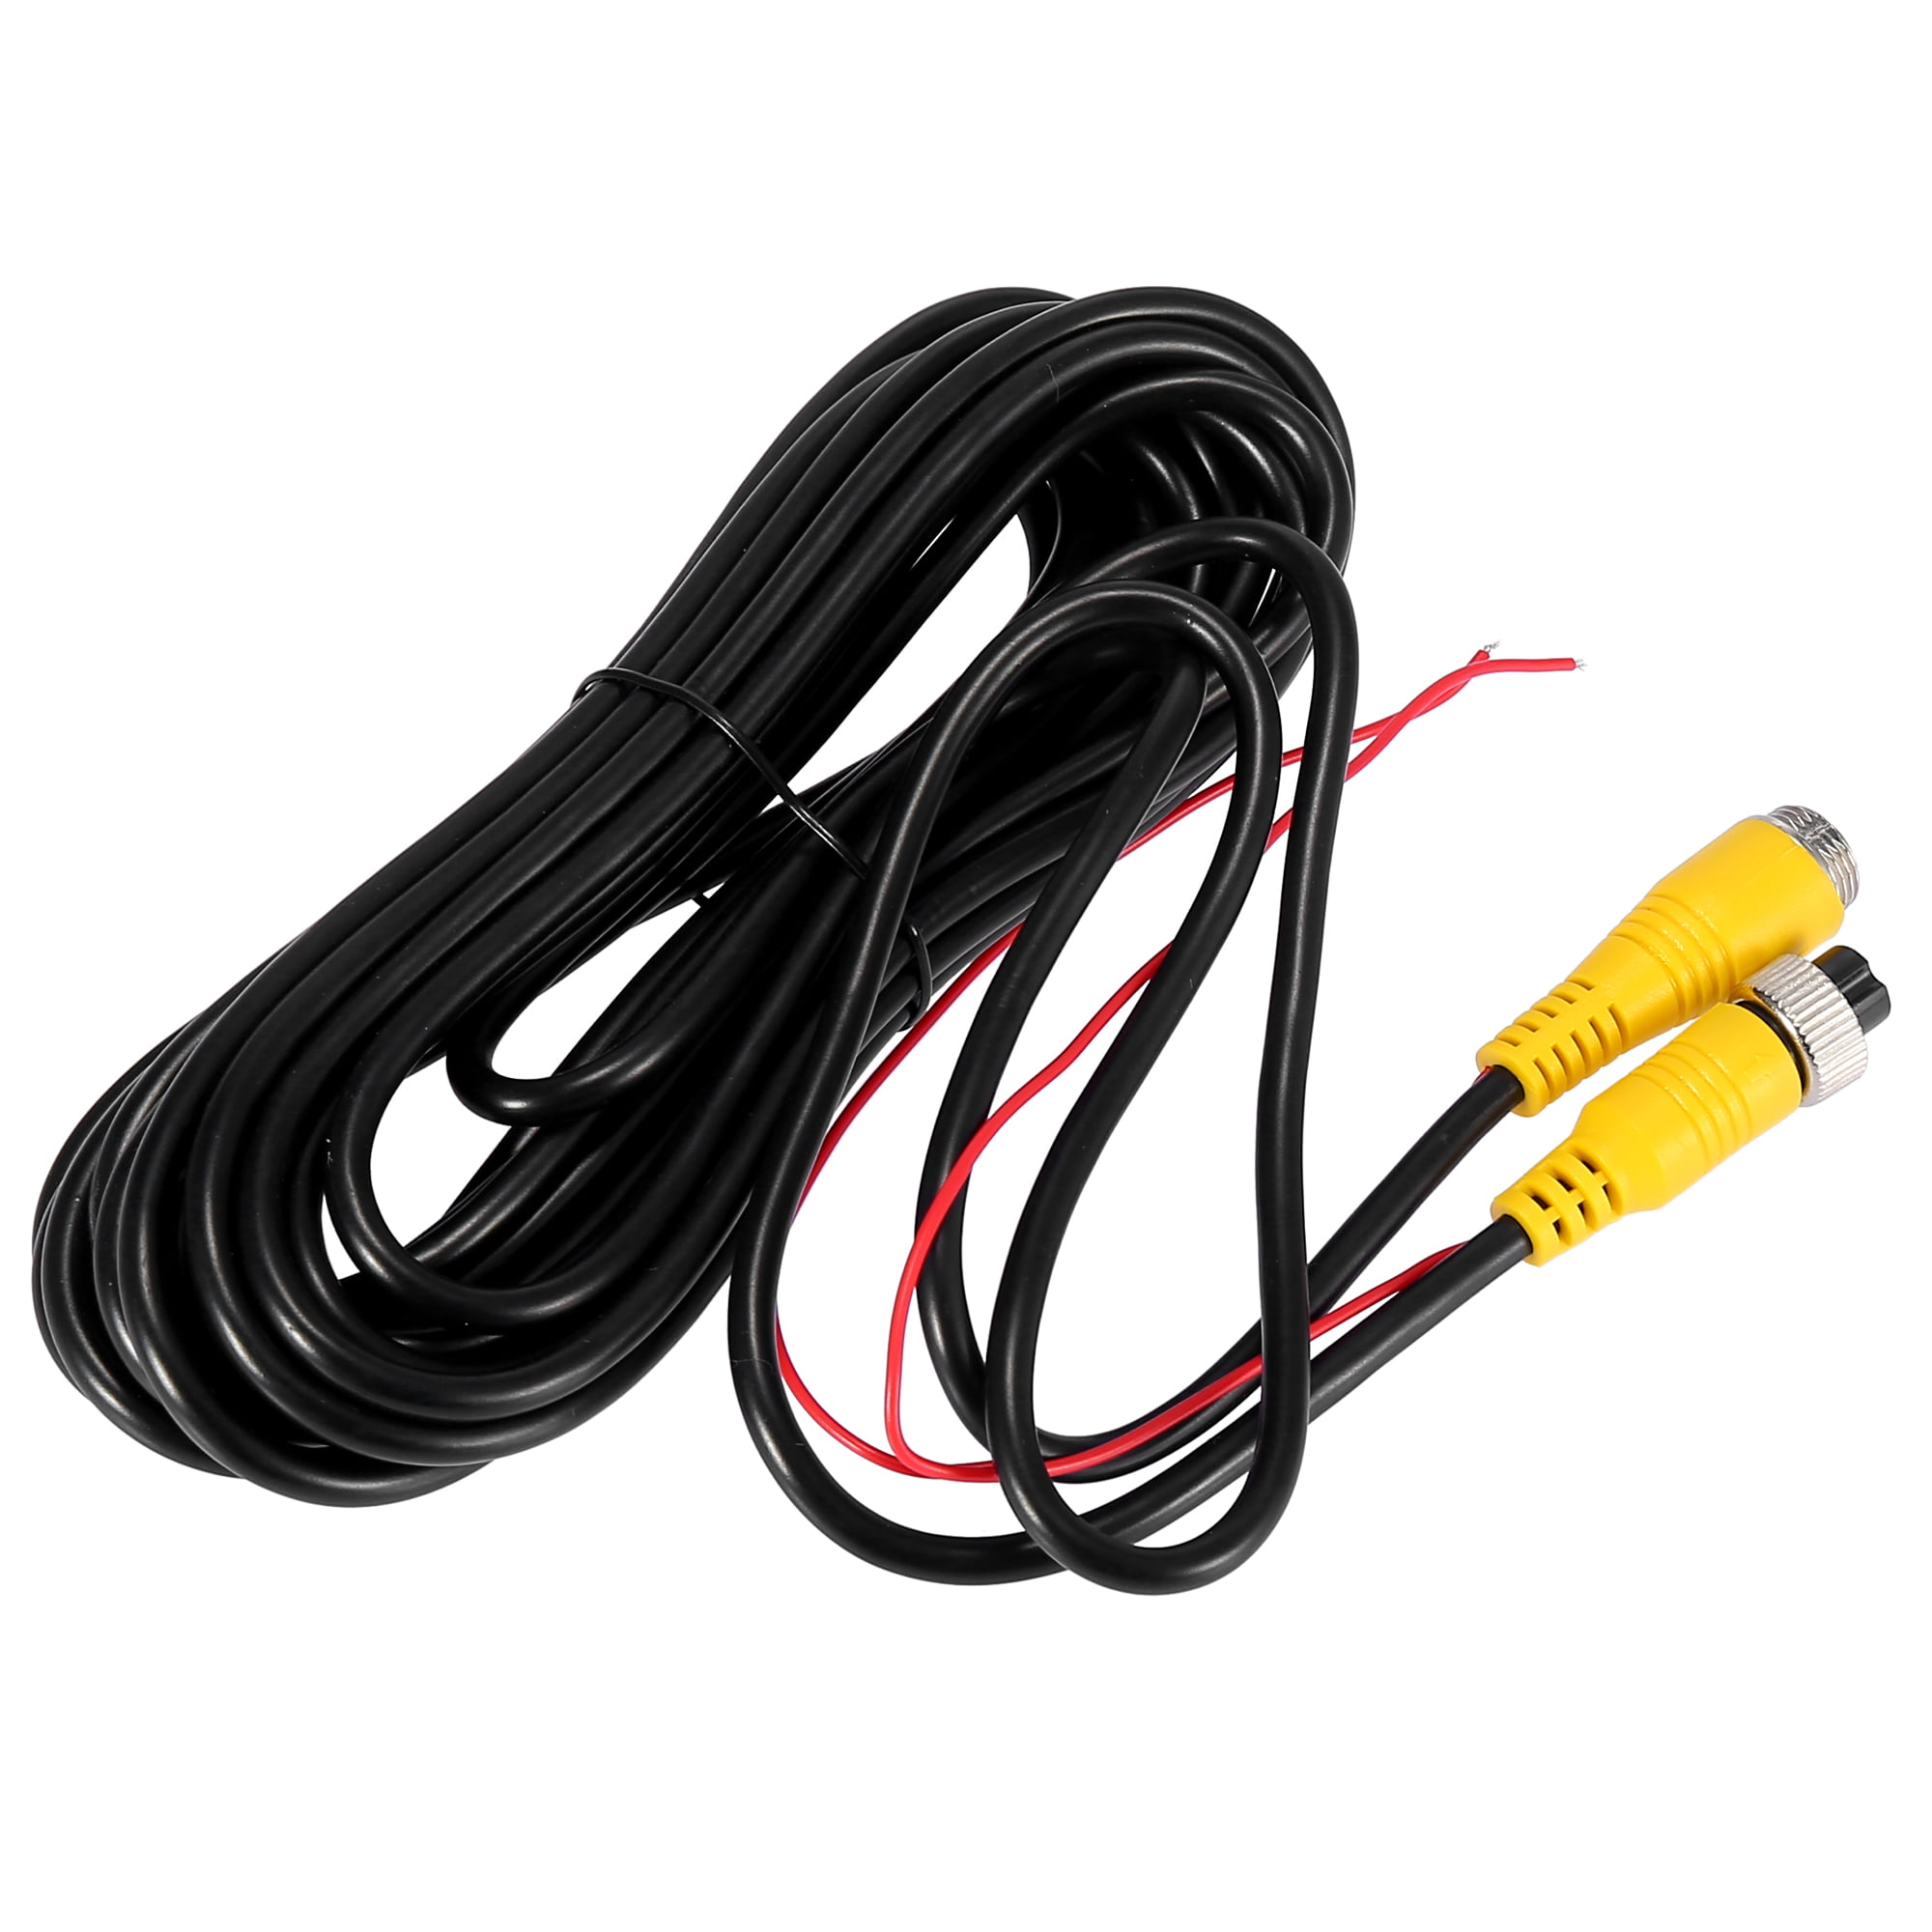 10m 4-Pin Cable Wiring Harness For Truck Off Road Car Rear View Camera Car Parts